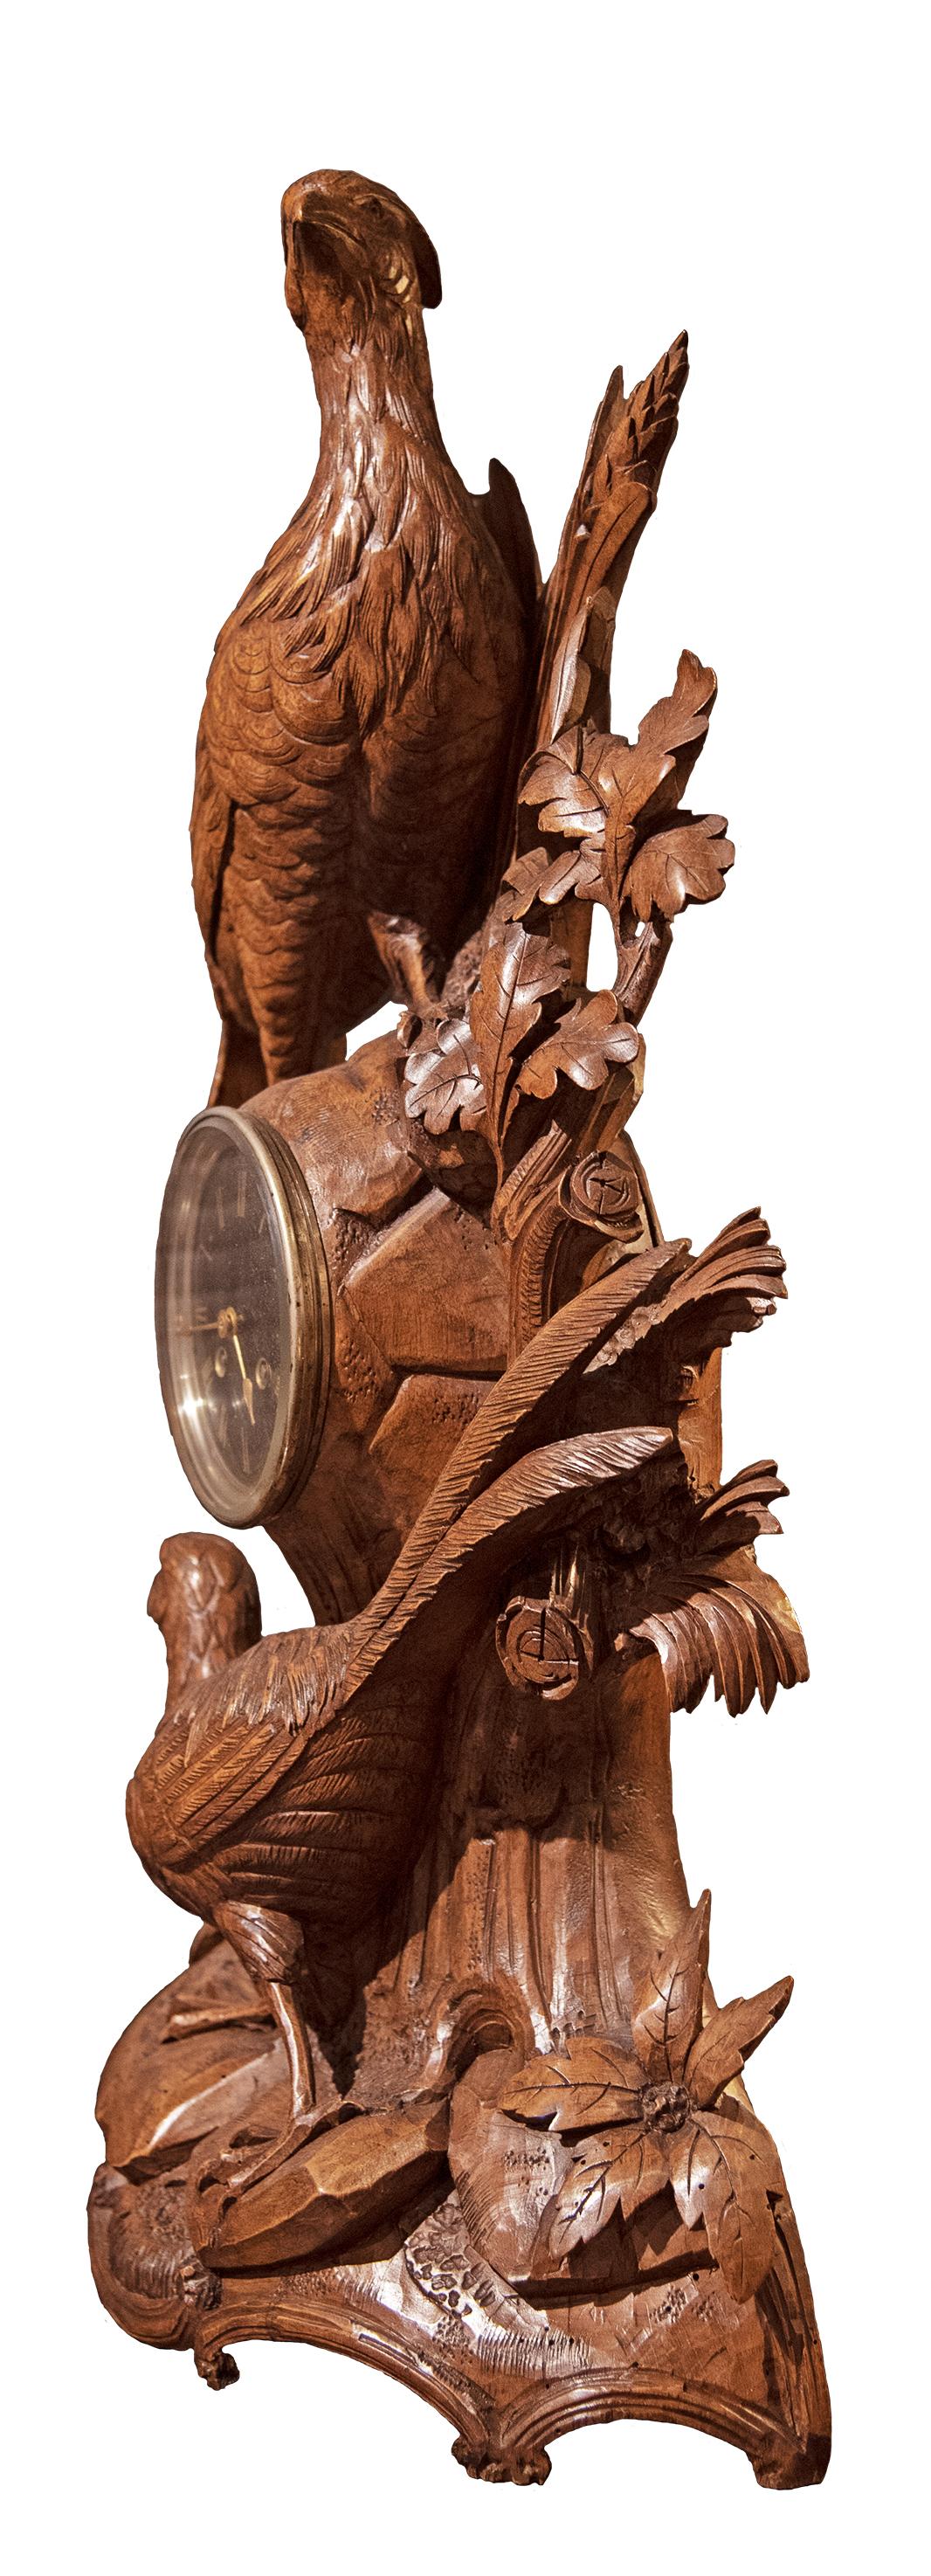 A nineteenth-century carved Swiss clock featuring two pheasants and vegetation.

Carved in the Black Forest style, popular in the late nineteenth century.